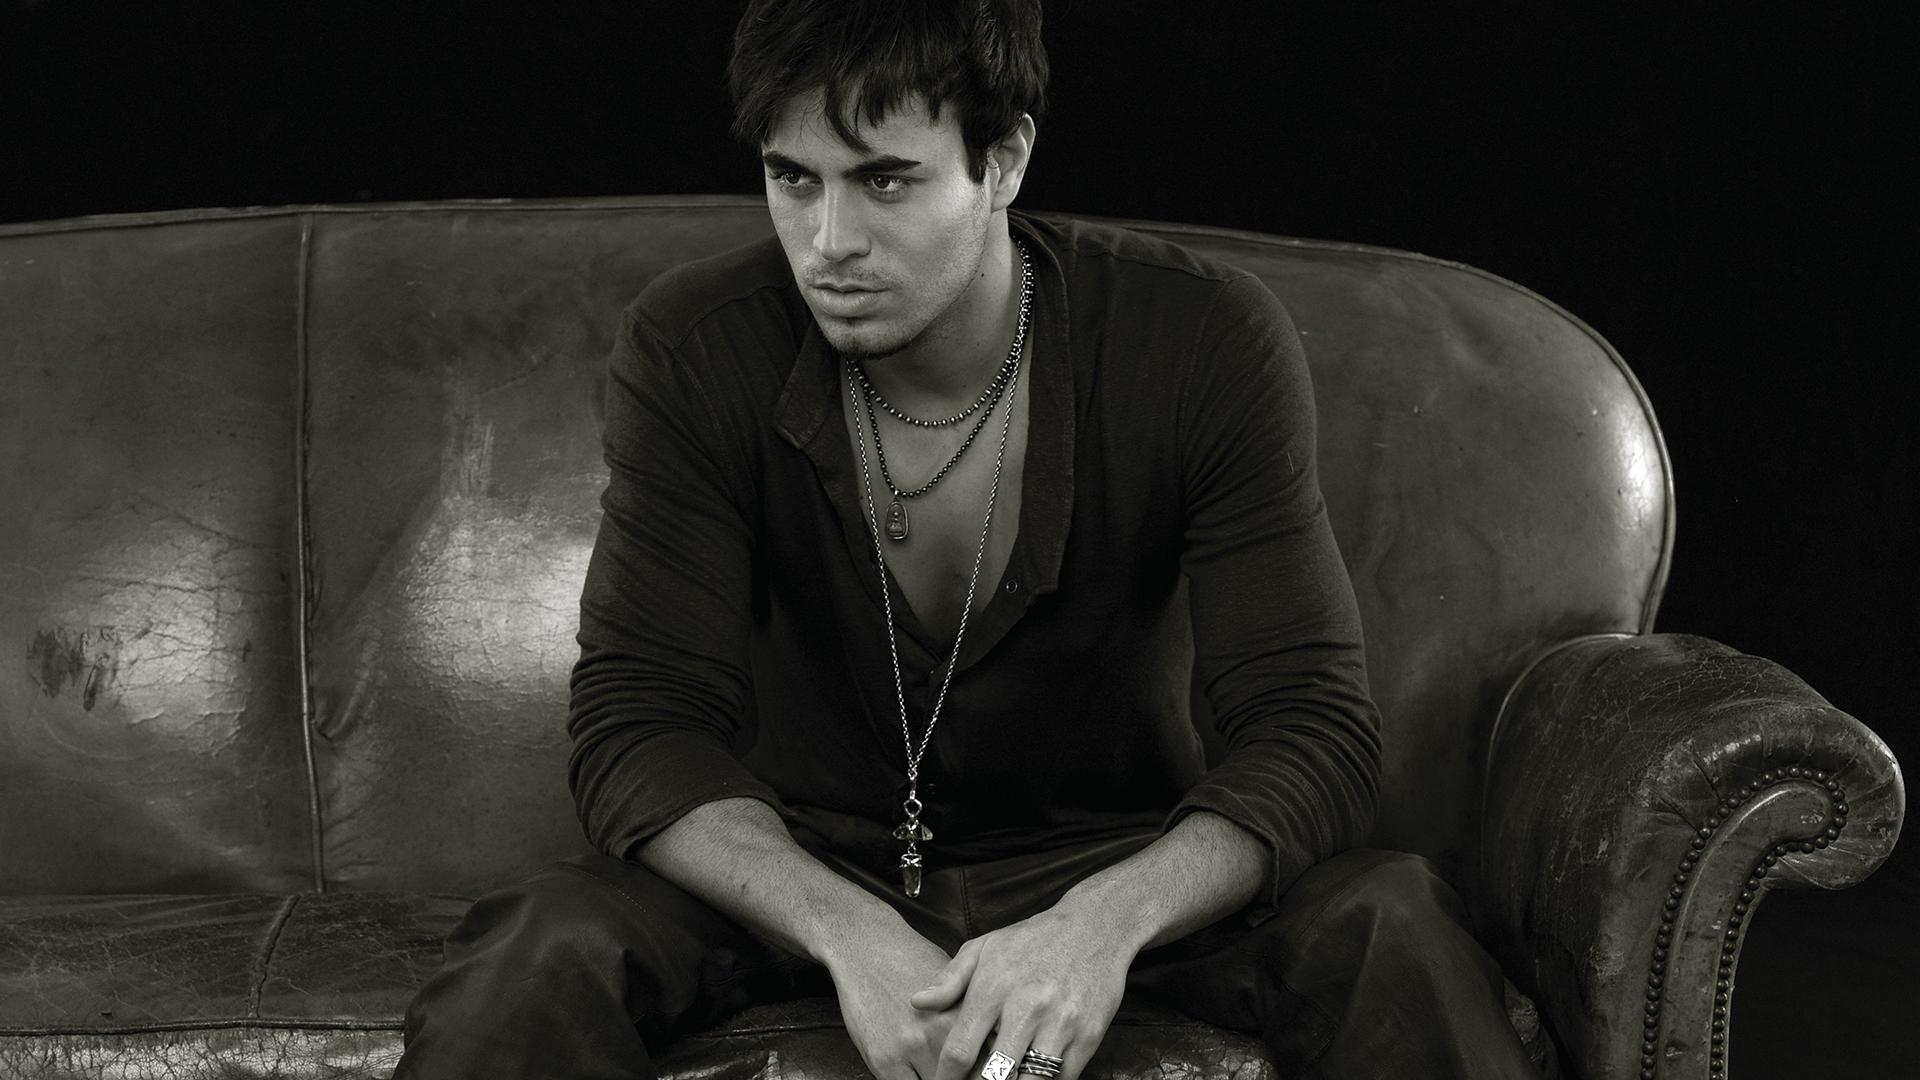 enrique iglesias hd wallpaper,photograph,sitting,human,photography,darkness